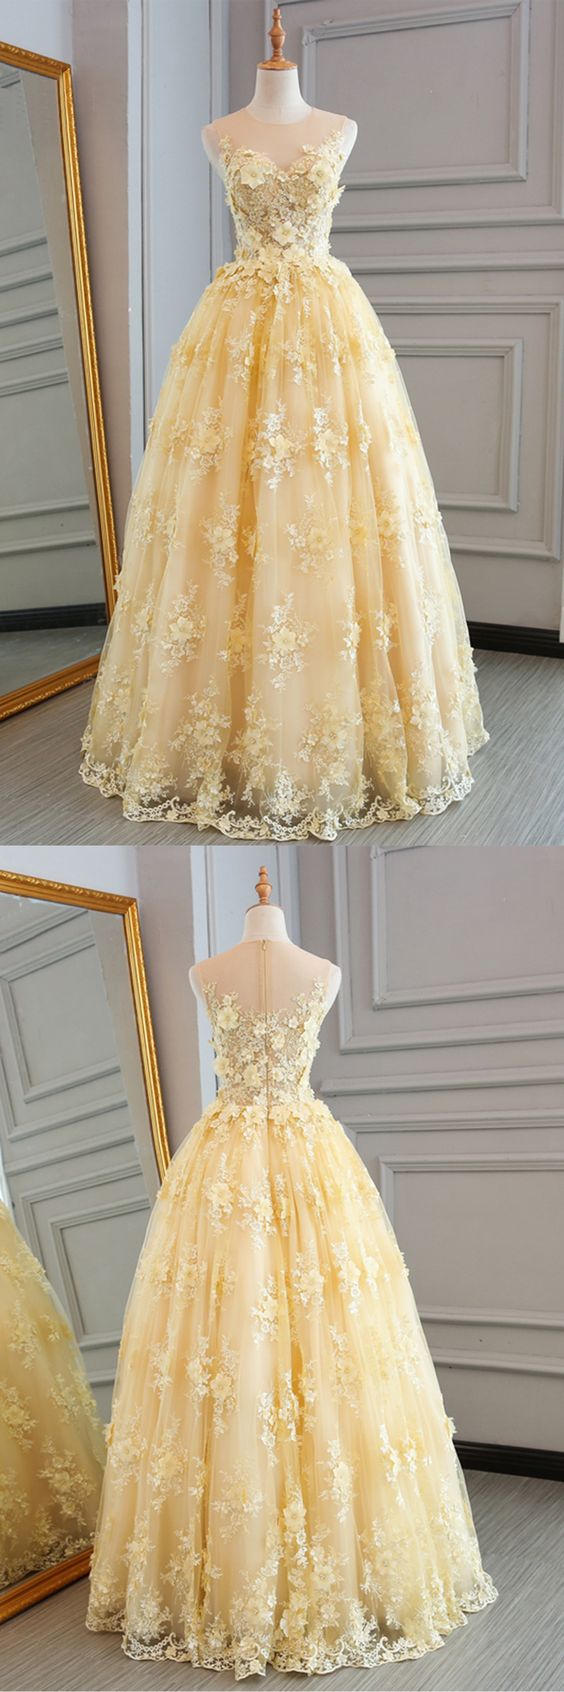 Yellow Tulle Lace Prom Dress, Ball Gown, 2018 Prom Dresse,plus Size Sheer Long Prom Dresses, Wedding Party Gowns ,formal Evening Dres,s Gowns